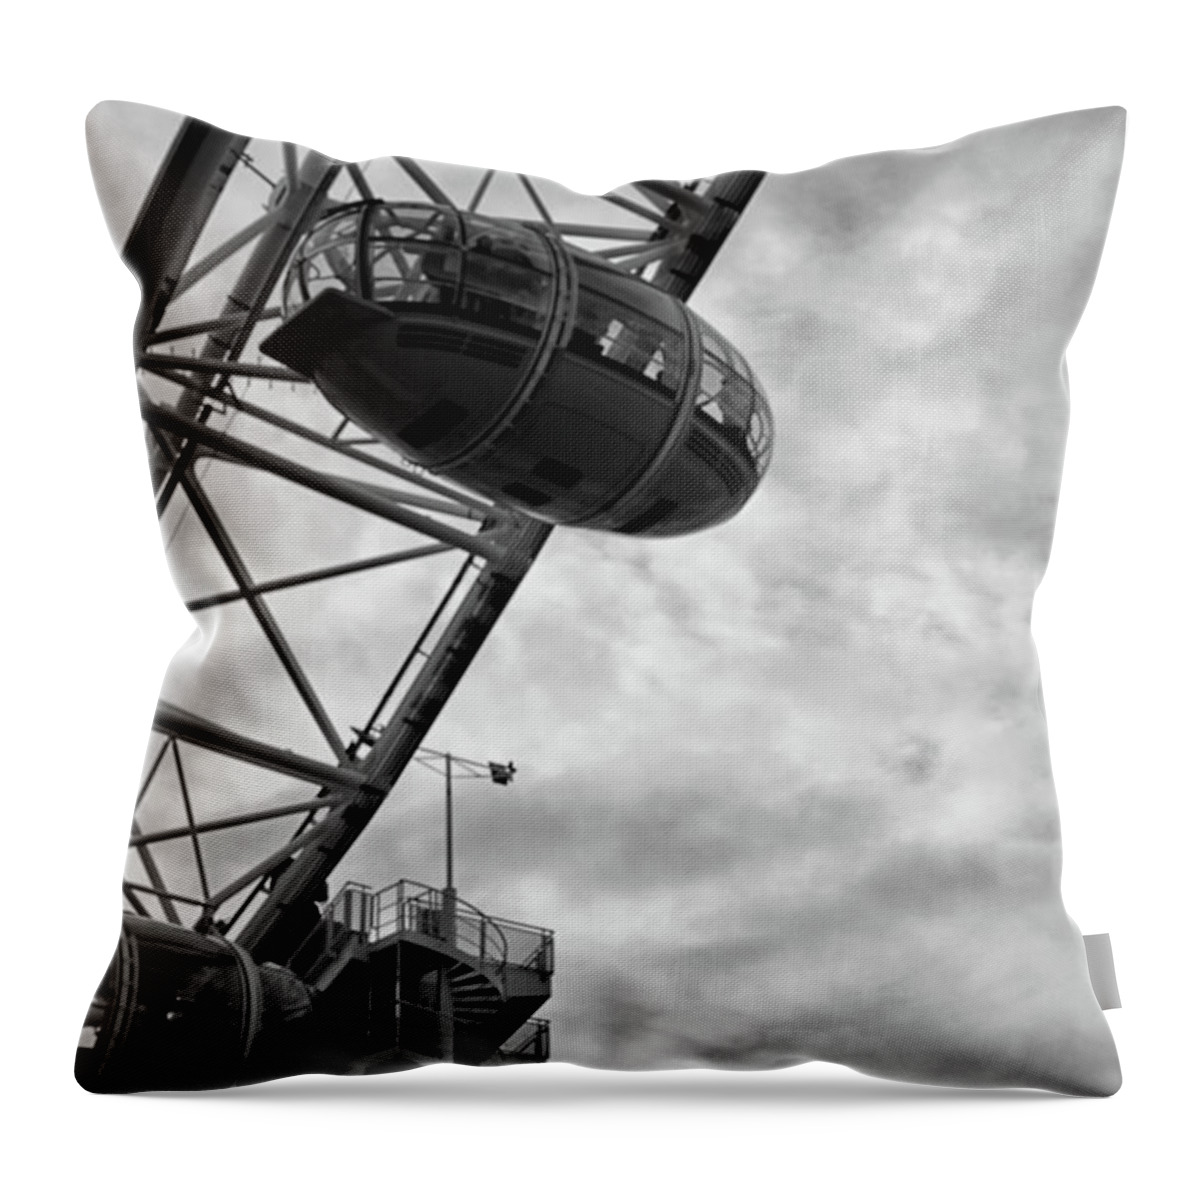 London Throw Pillow featuring the photograph The London Eye #1 by Martin Newman